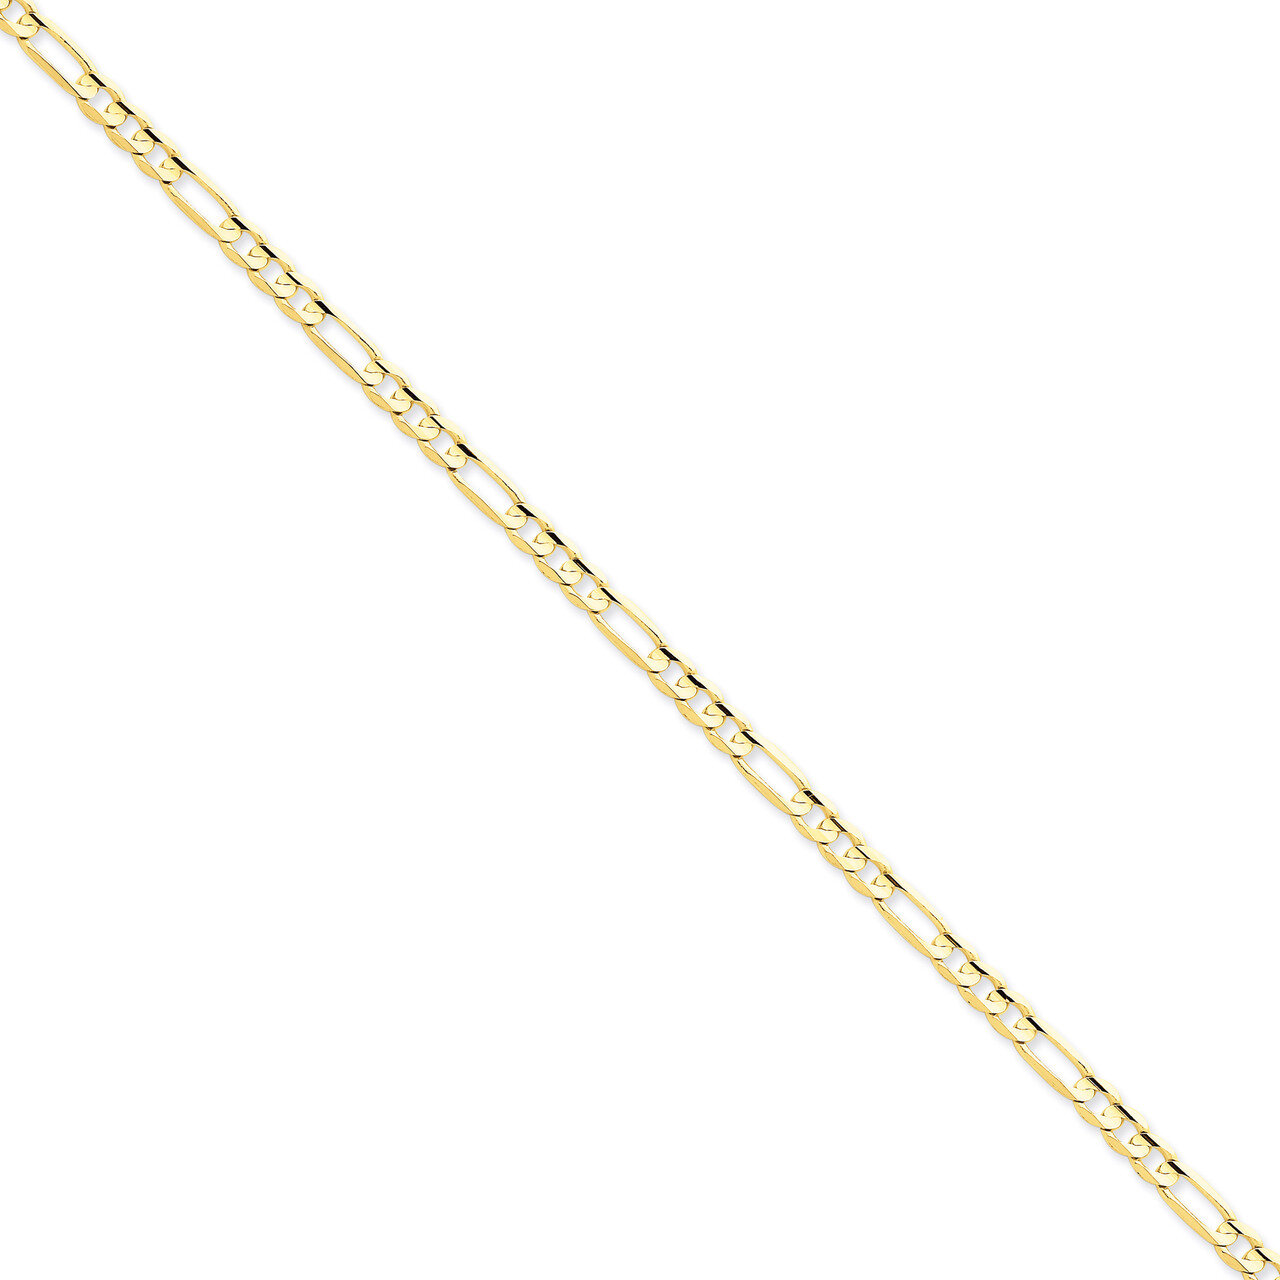 4.5mm Concave Open Figaro Chain 22 Inch 14k Gold LFG120-22